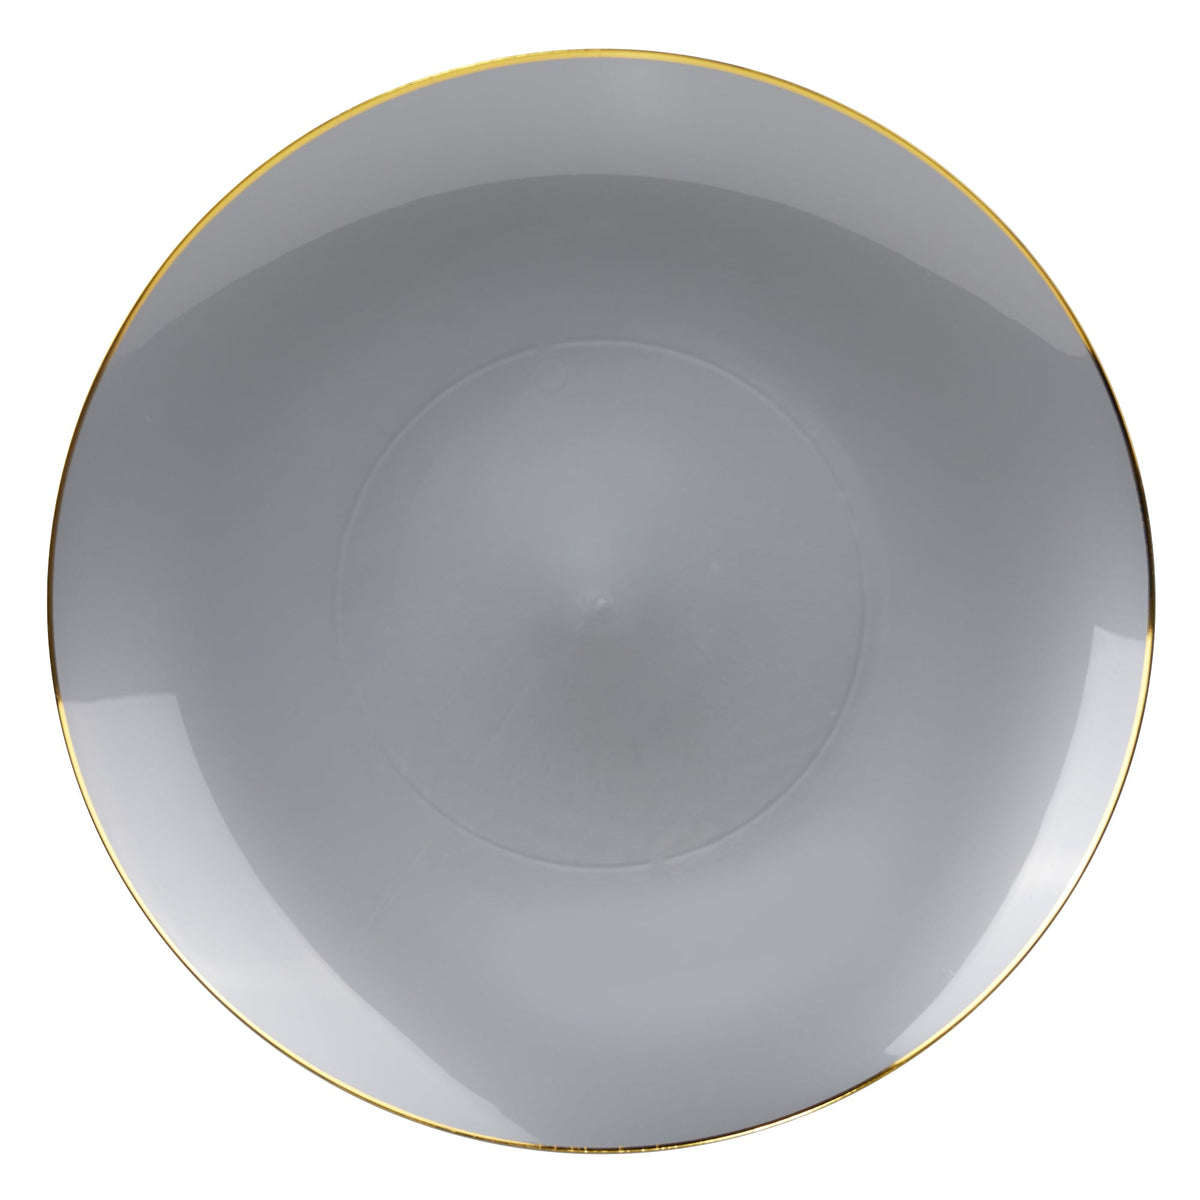 MADISON IMPORTS Disposable-Plasticware Premium Quality Round Grey Plates with Gold Rim, 10 Inches, 10 Count 775310999176